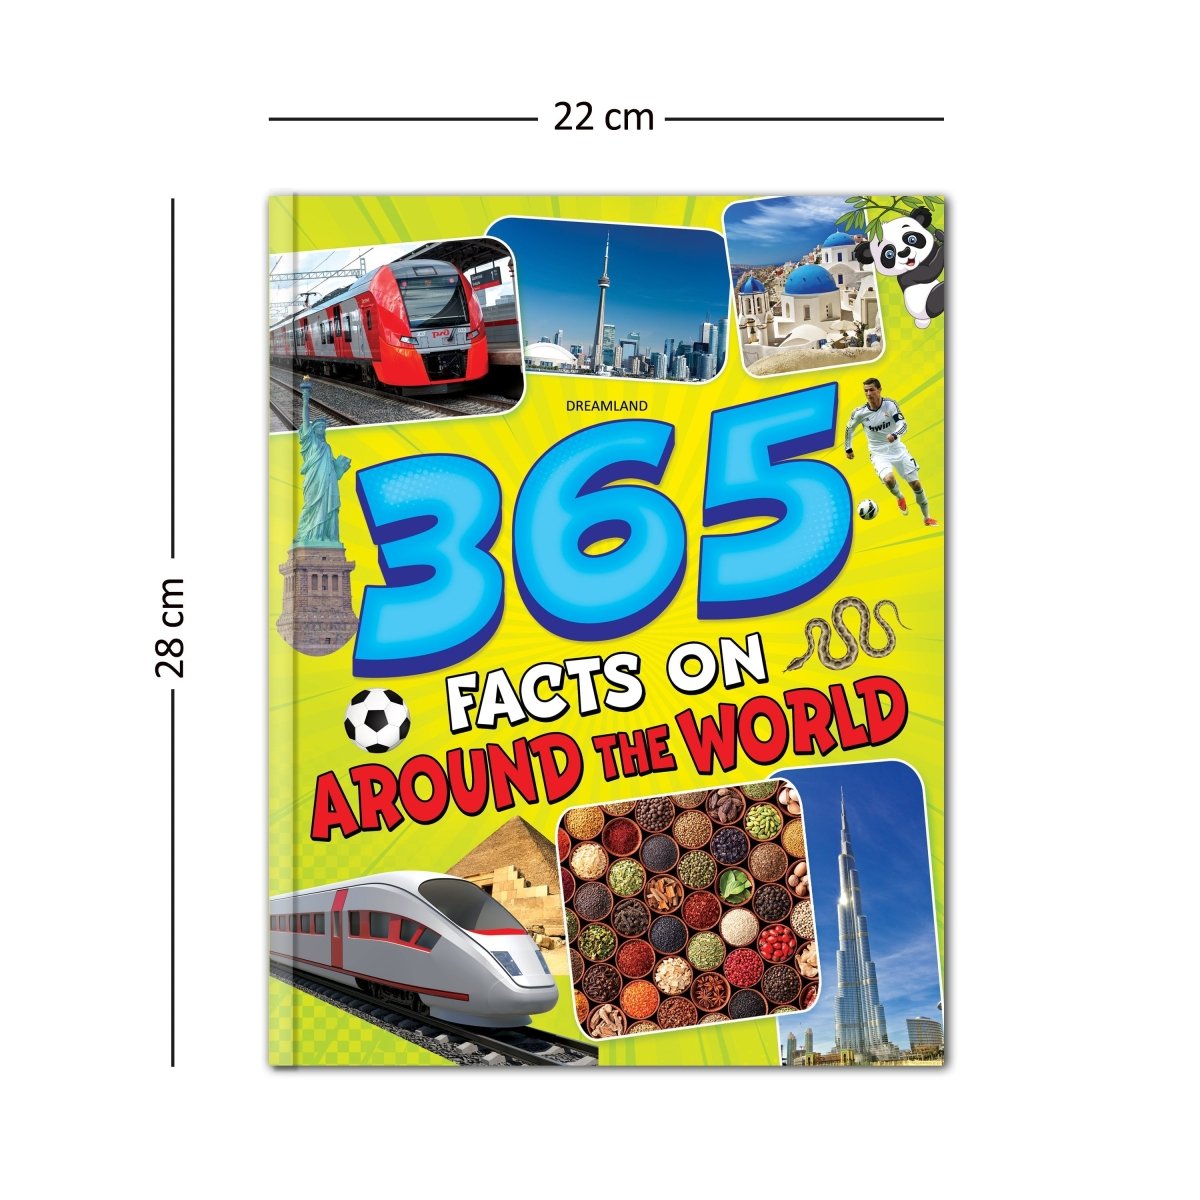 Dreamland Publications 365 Facts Series (A Set of 3 Books) - 9788194311942